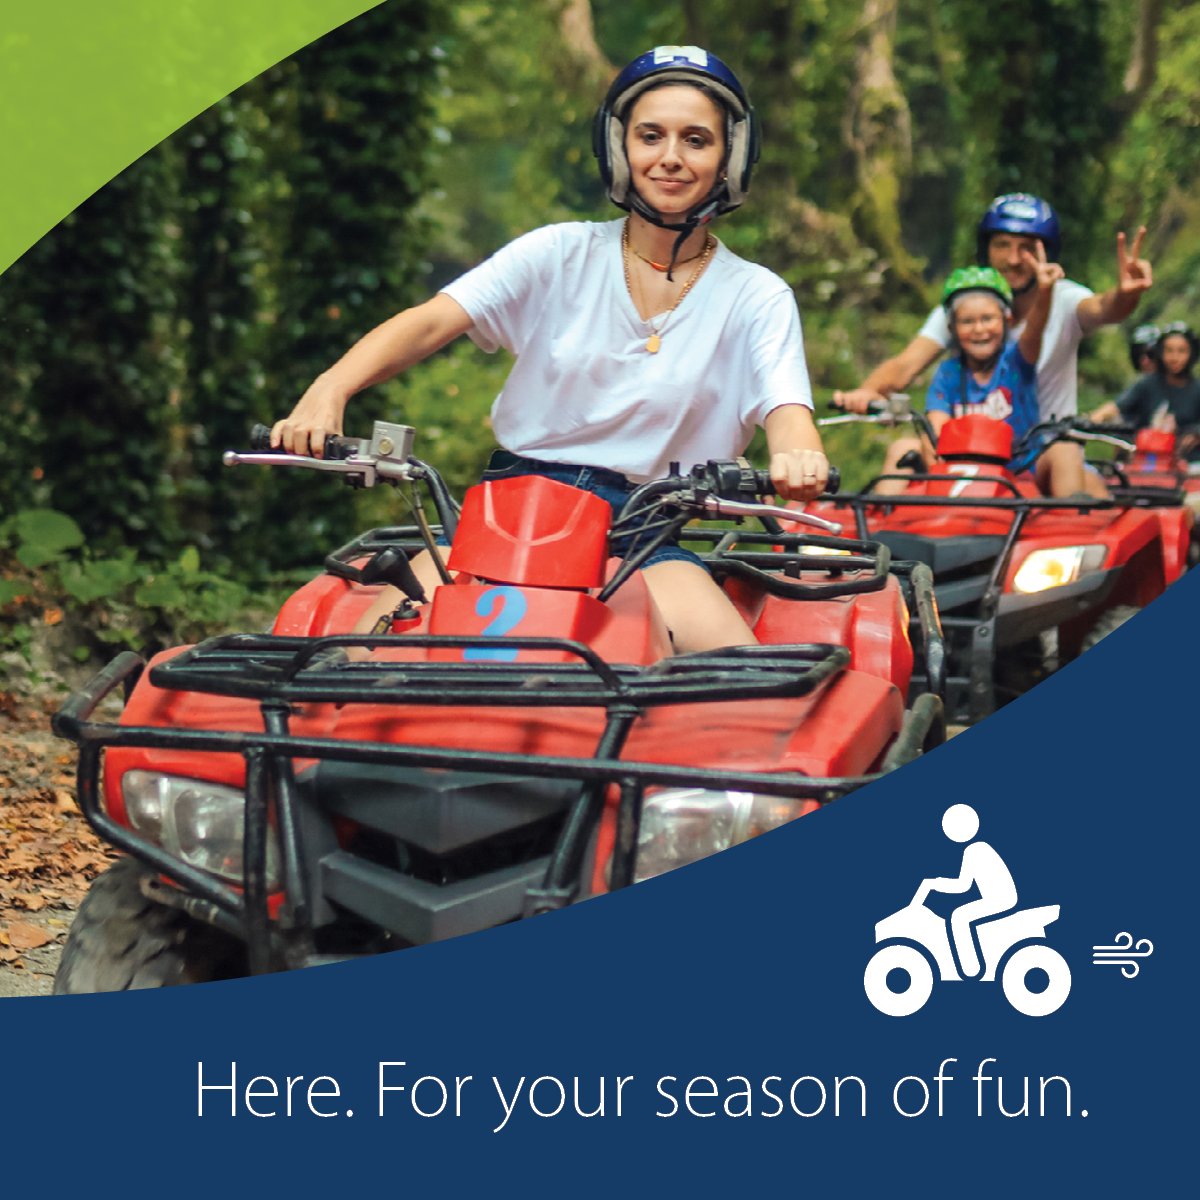 License or register your ATV/four-wheeler at any Hennepin County Service Center. Your decal and registration (good for 3 years) will be issued at the time you apply. bit.ly/4aNQ8lc